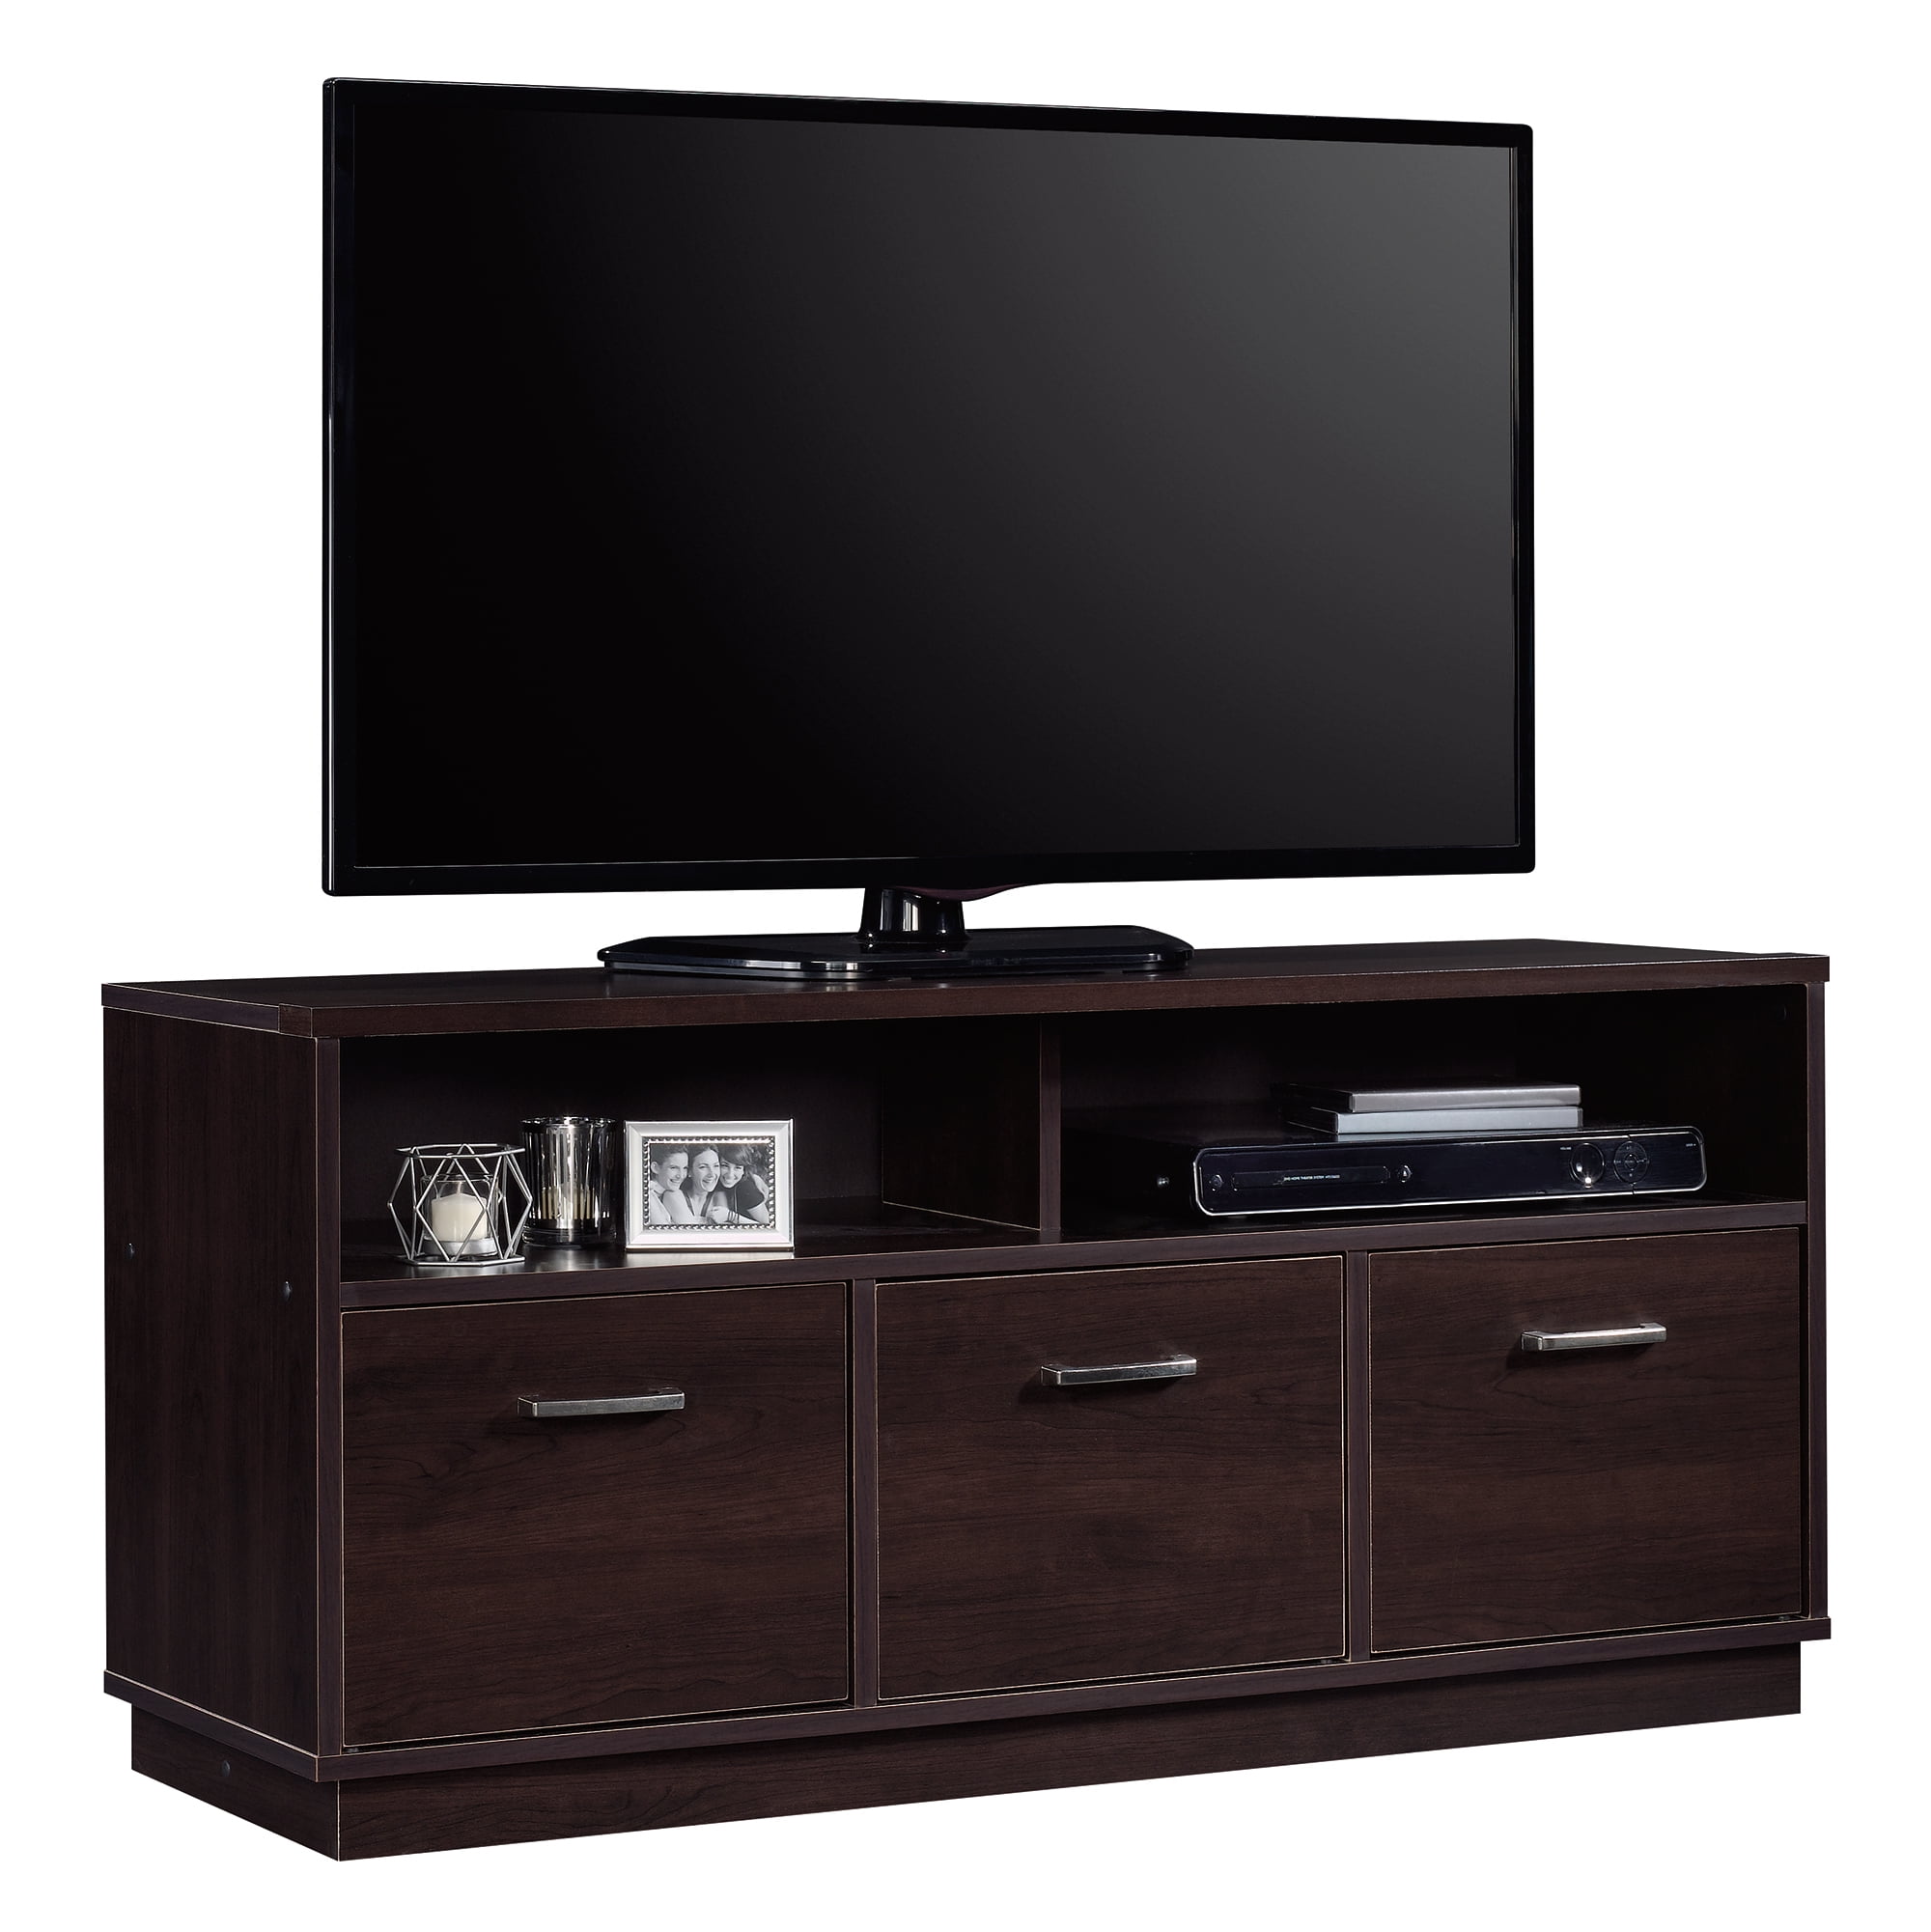 Wood Entertainment Cabinet 4 Finishes 3-Door TV Stand Console for TVs up to 50" 